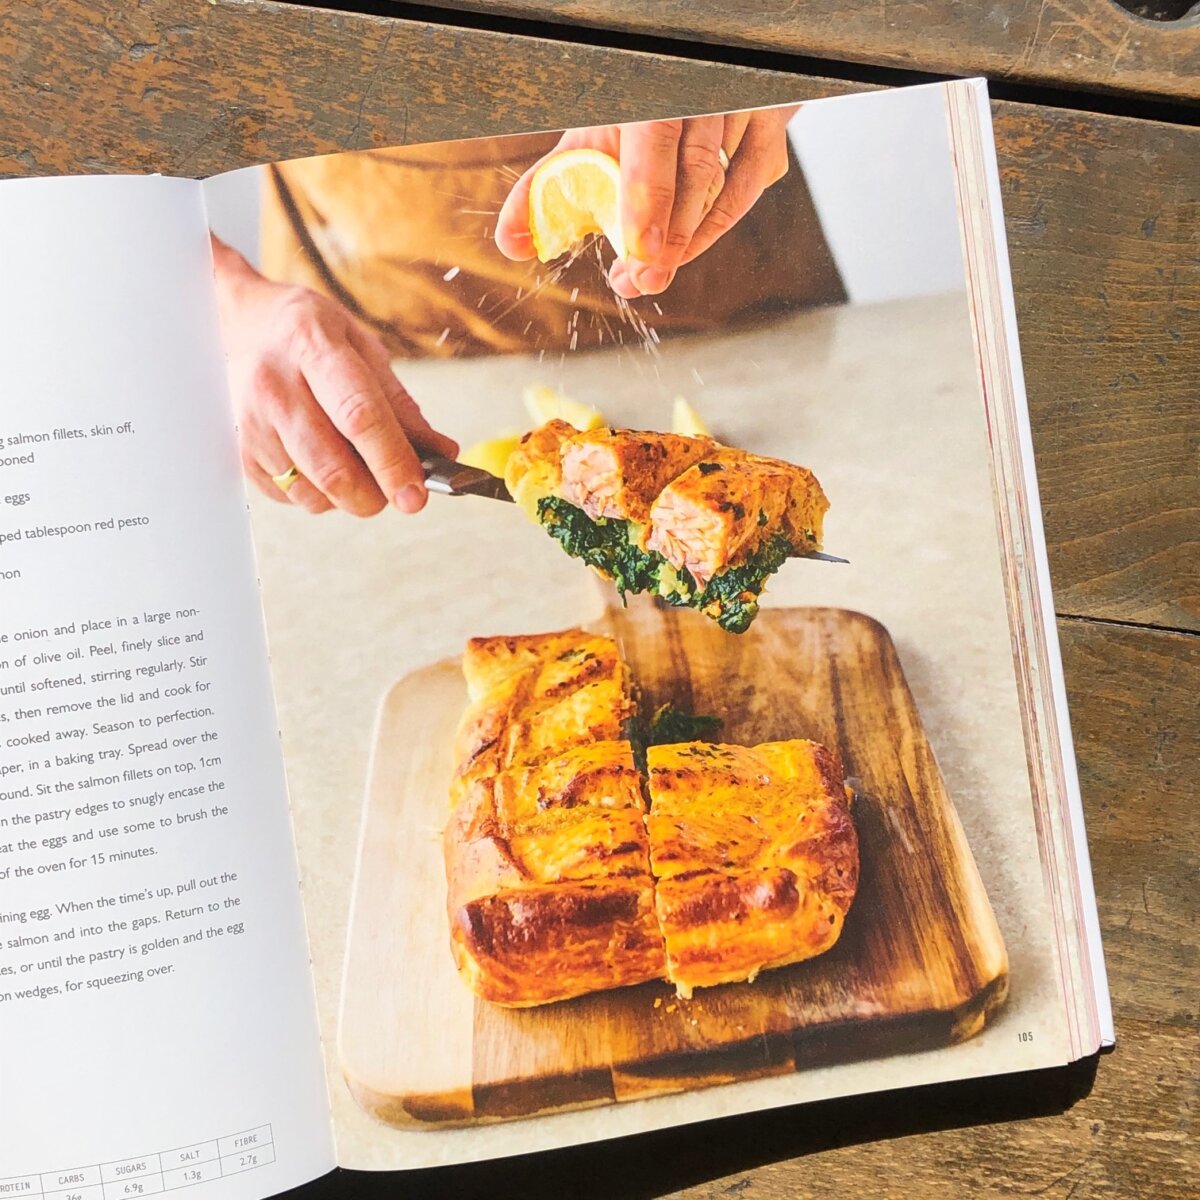 Levon Biss – yes that’s right, Levon Biss has just shot Jamie Oliver’s latest food book. - CRXSS